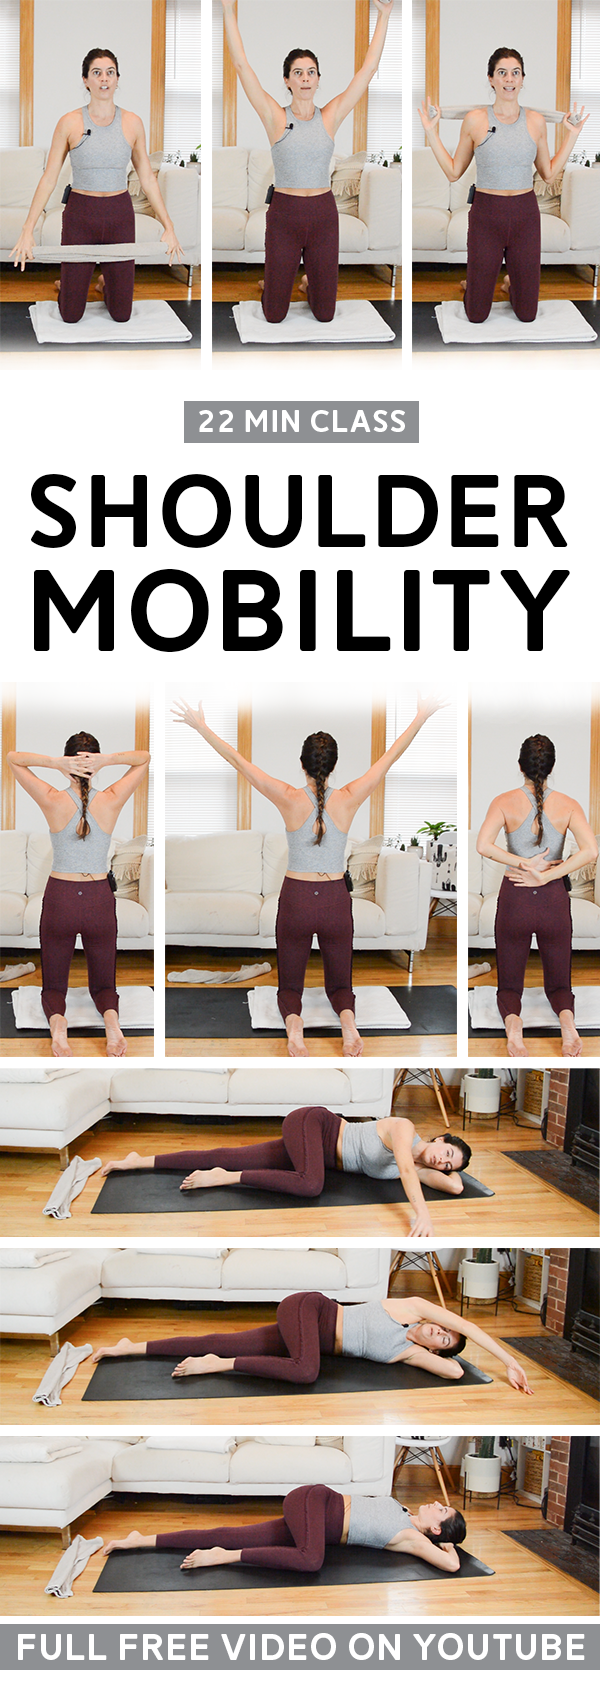 6 Great Shoulder Stretches and Mobility Exercises - Onnit Academy